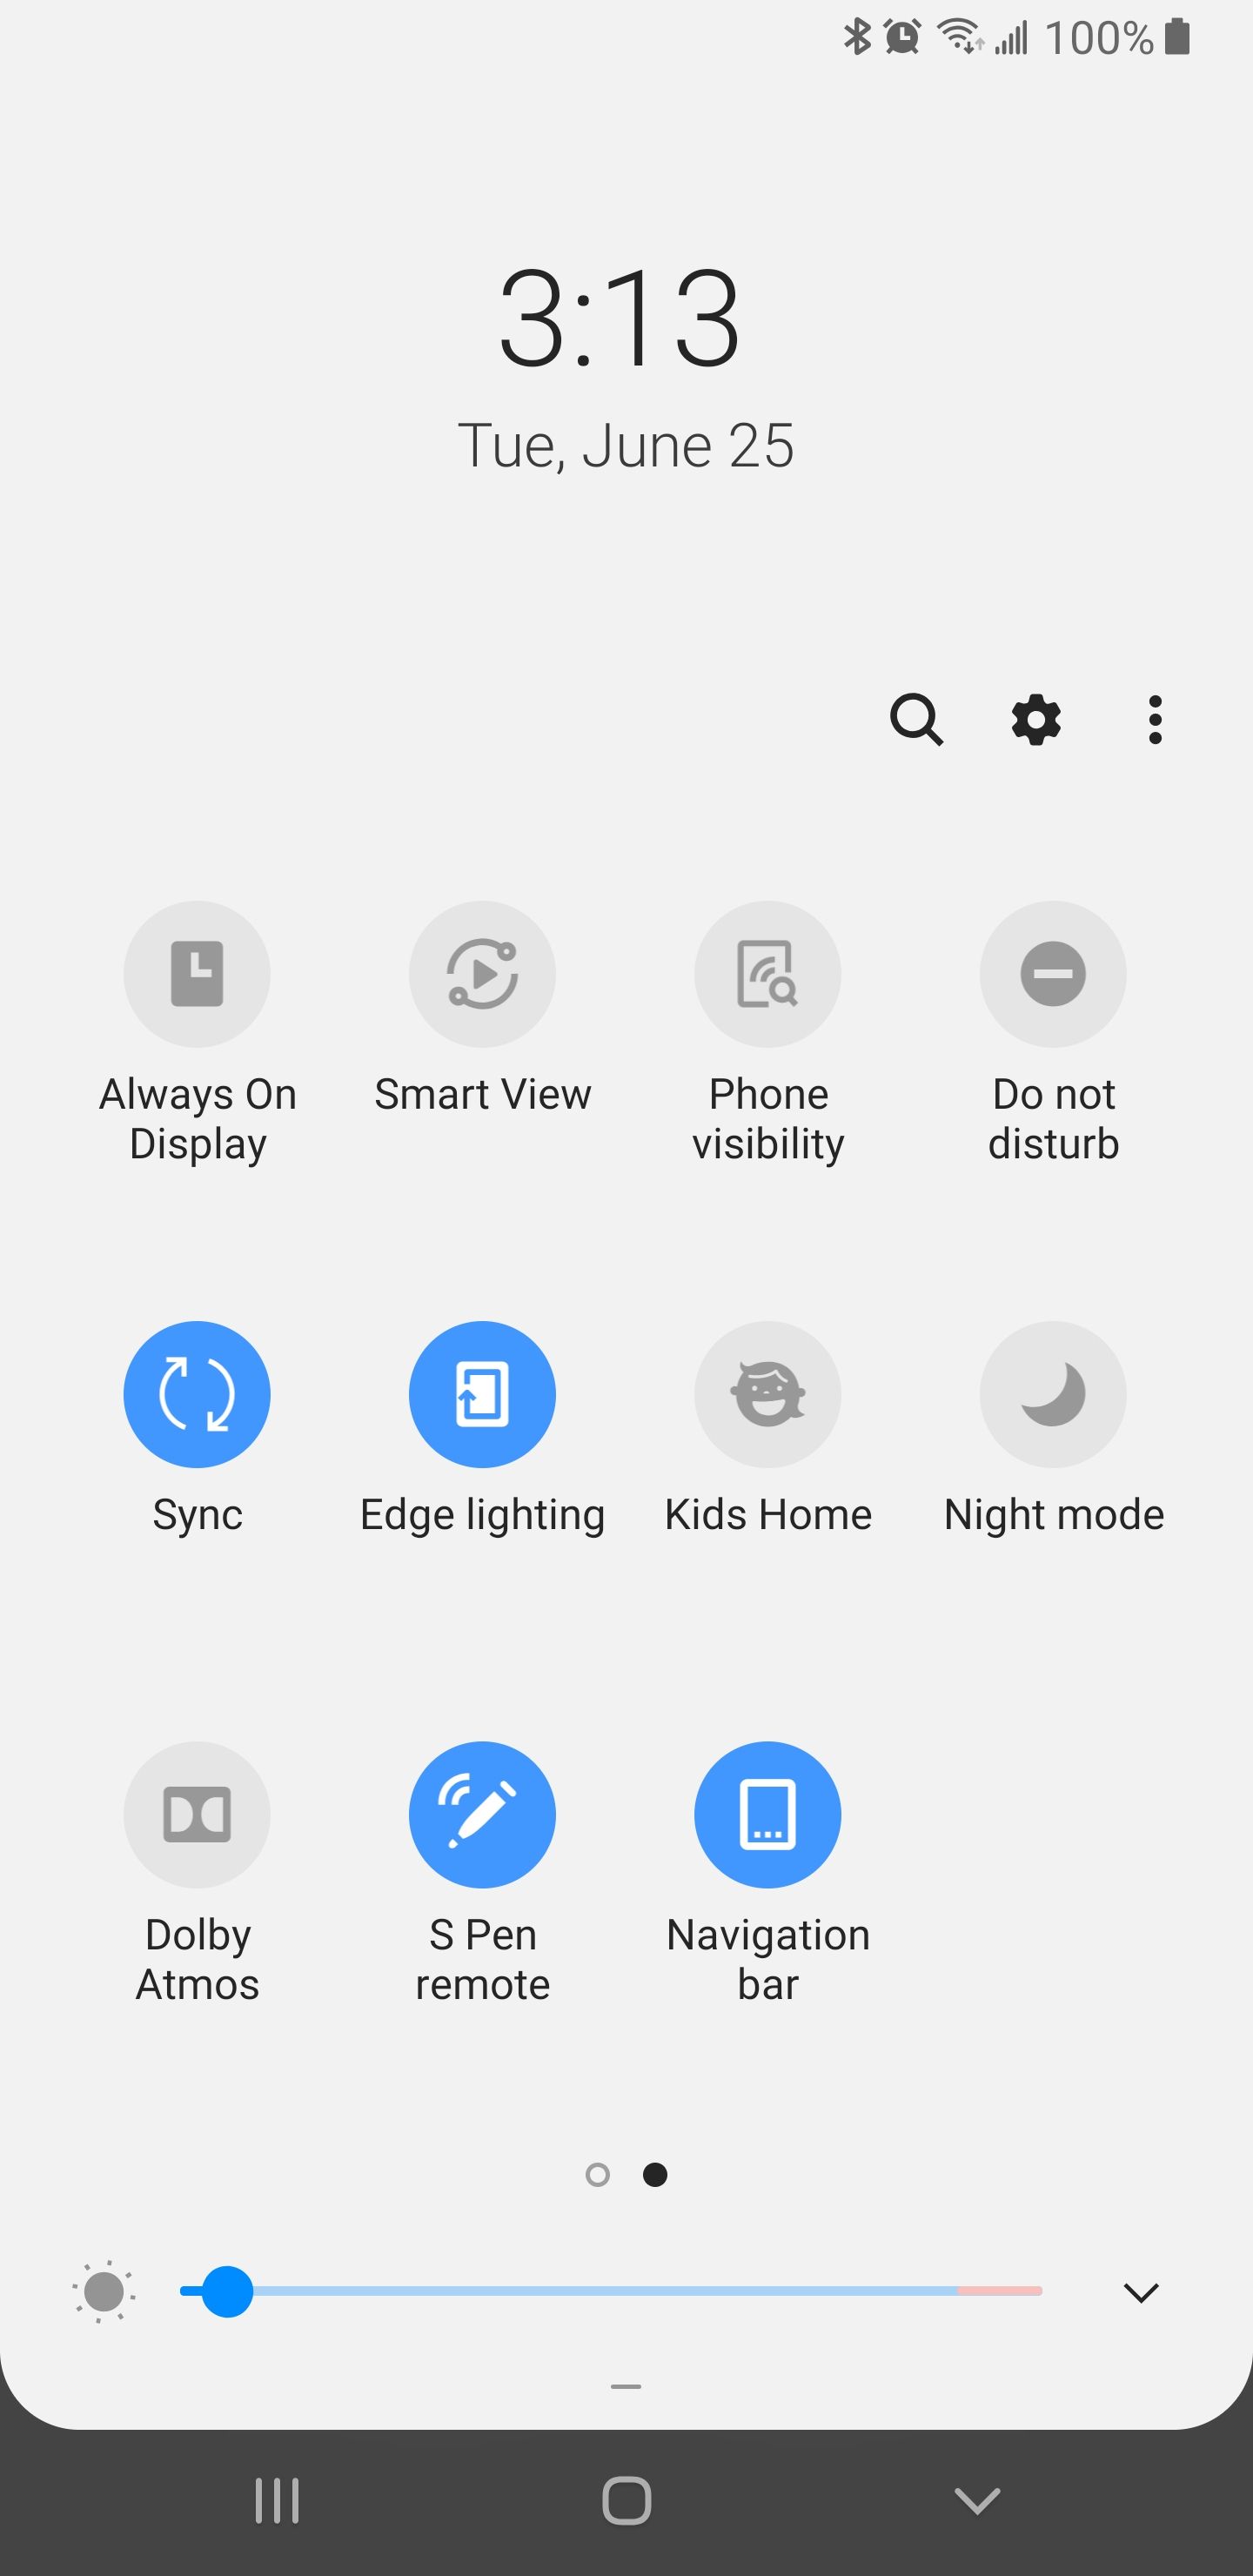 Auto Rotate" button removed after recent Pie update - Samsung Community